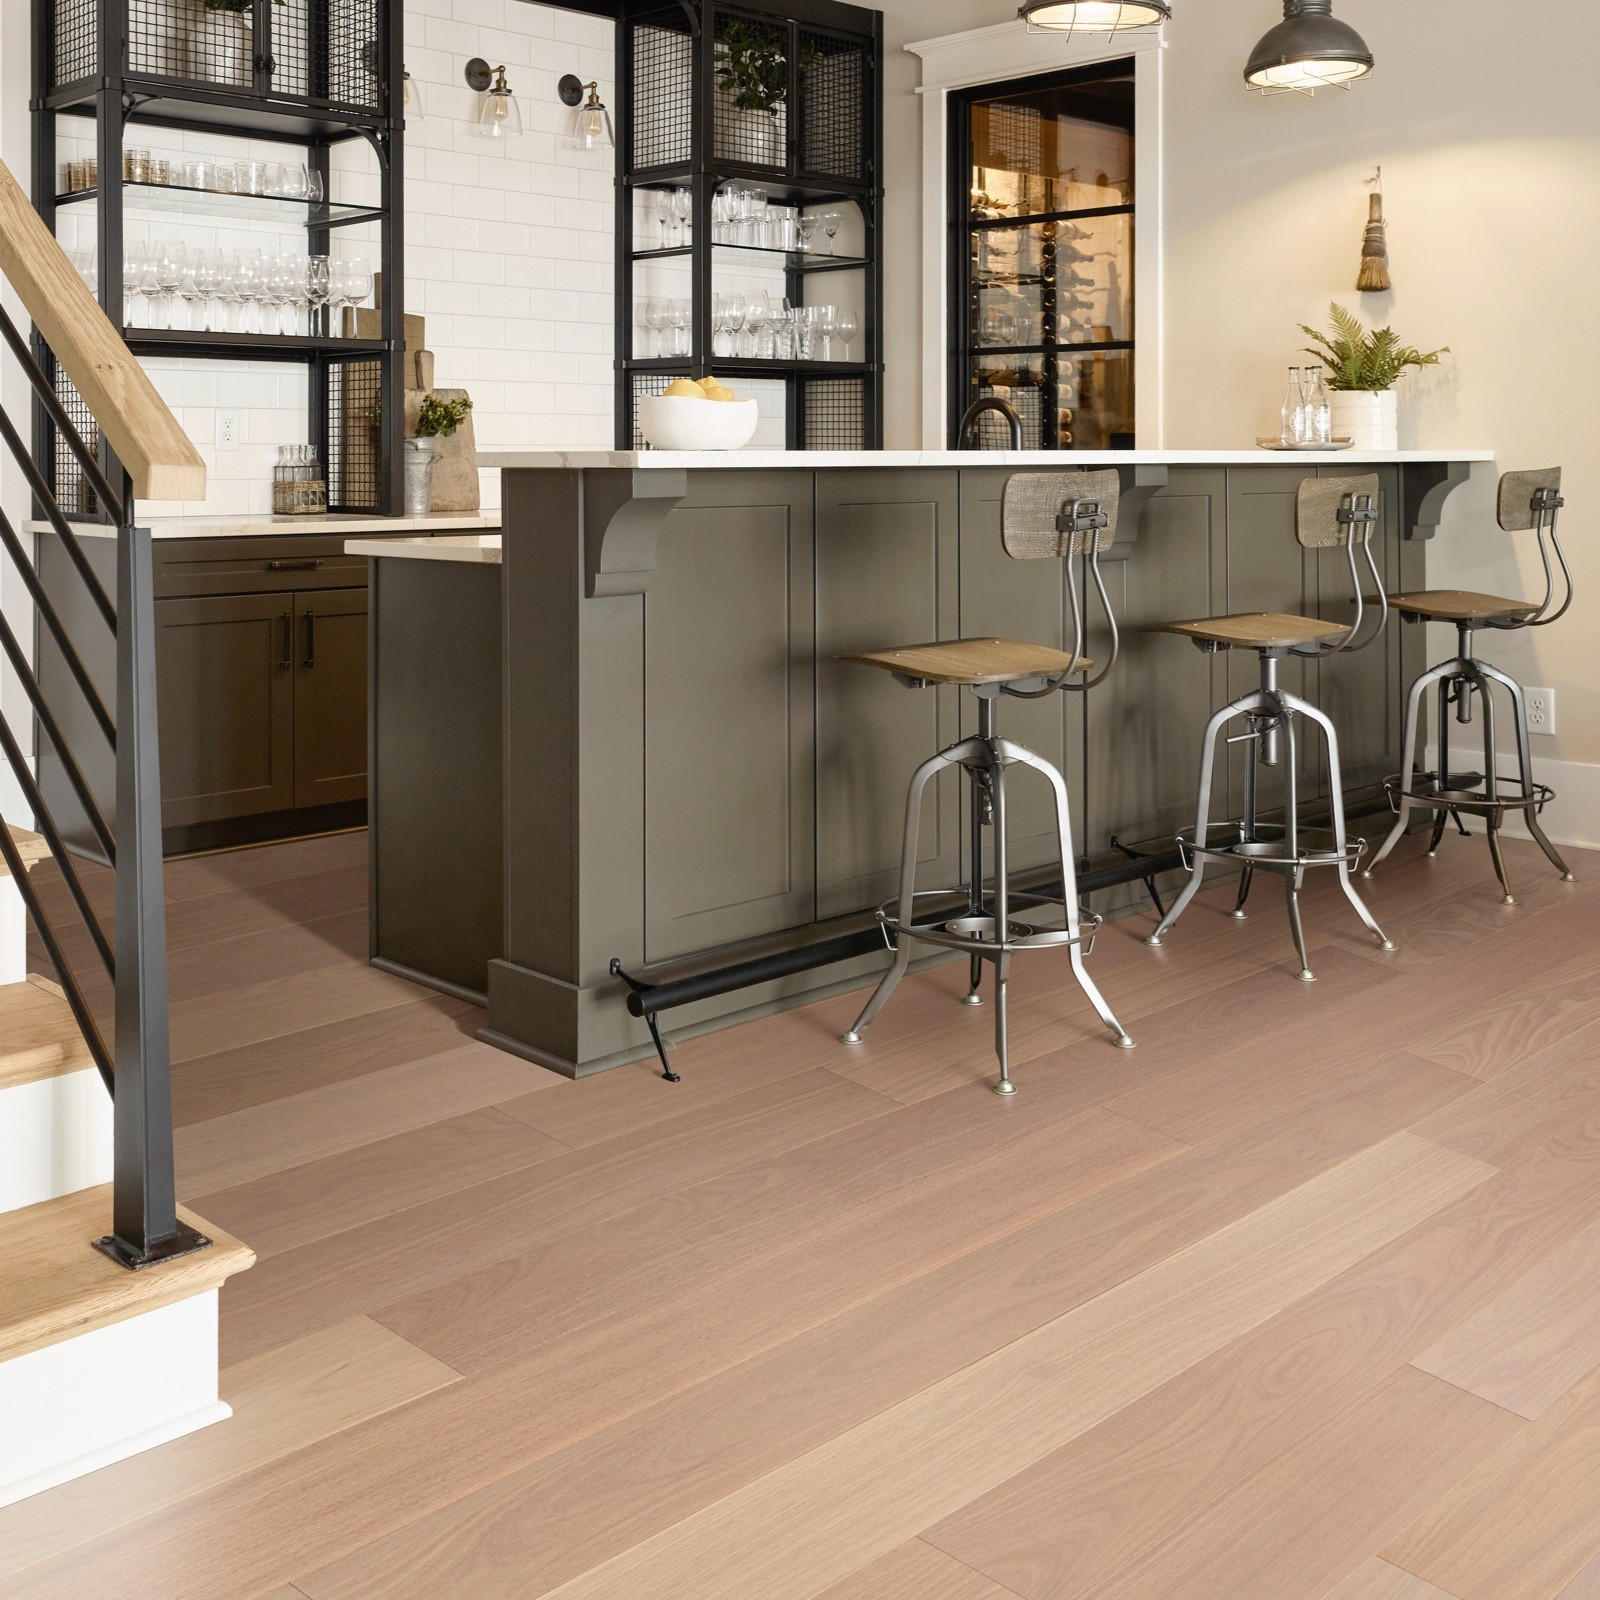 hardwood Shaw floors in kitchen | Sterling Carpet and Flooring